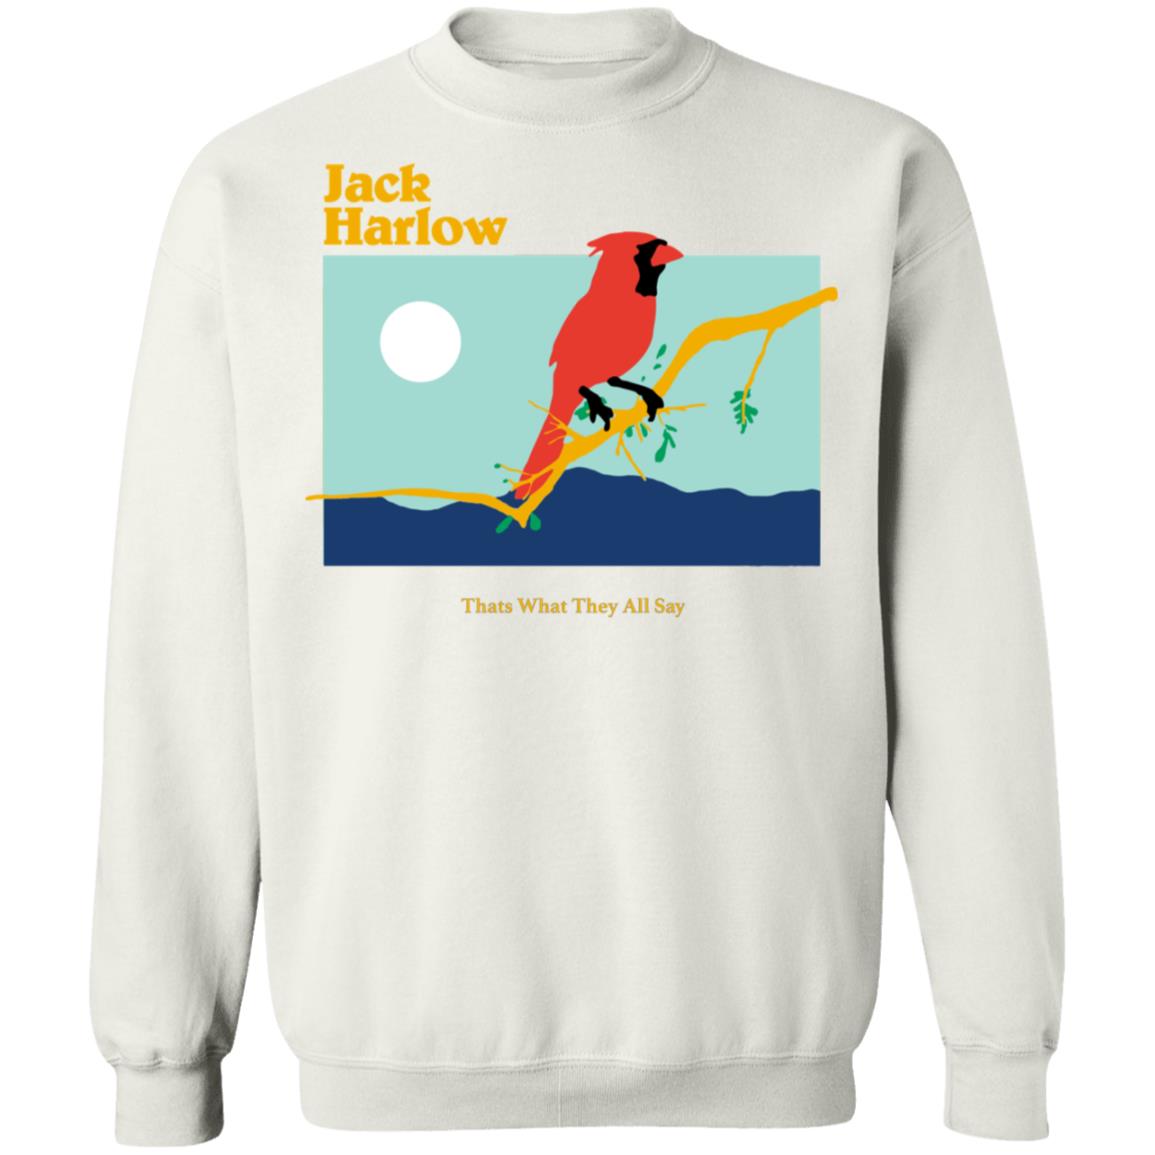 Get your hands on the latest Jack Harlow merchandise